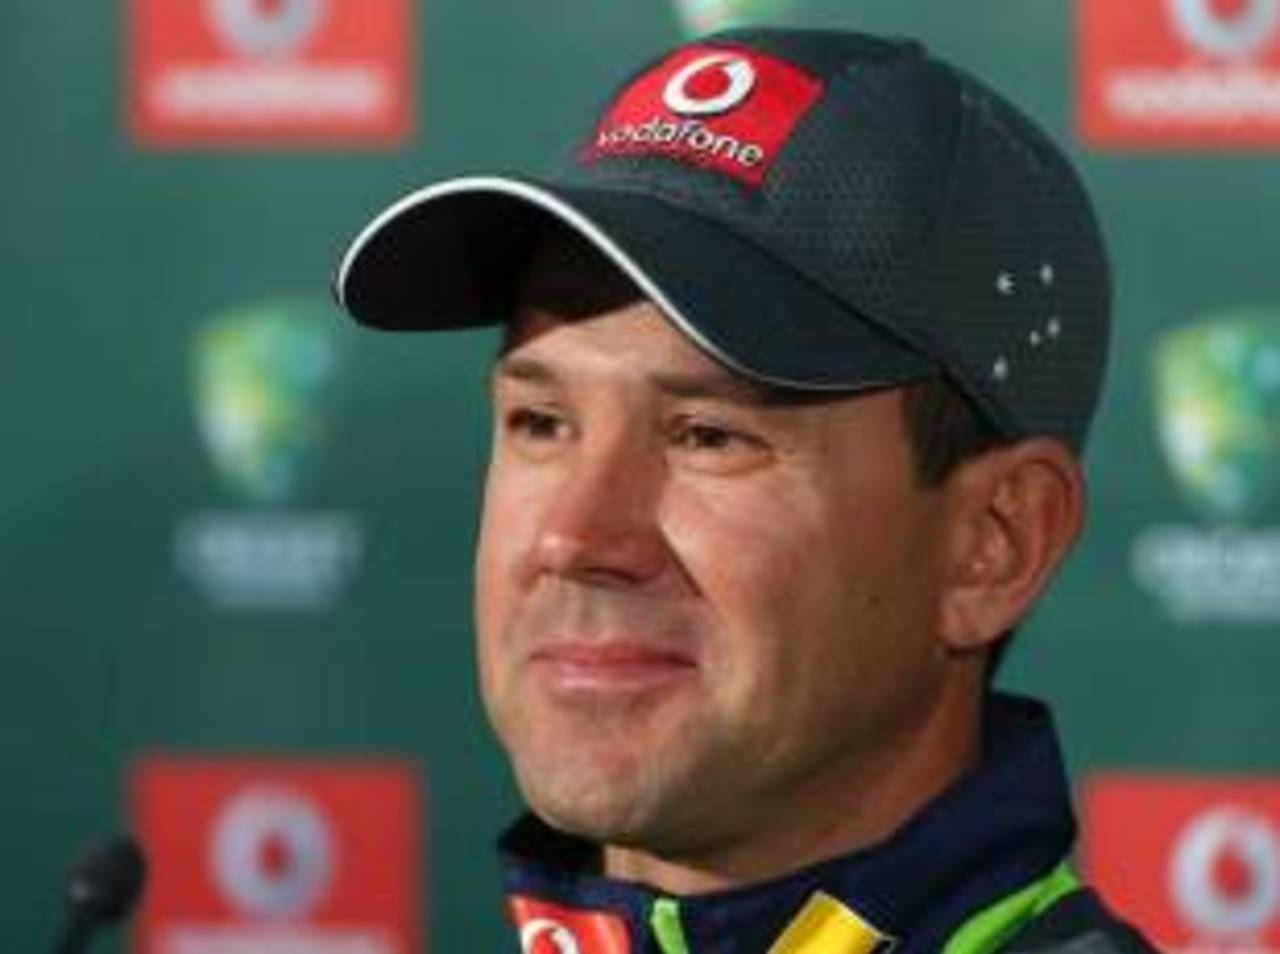 Ricky Ponting speaks to reporters at a press conference during which he said the Perth Test will be his last, Perth, November 29, 2012